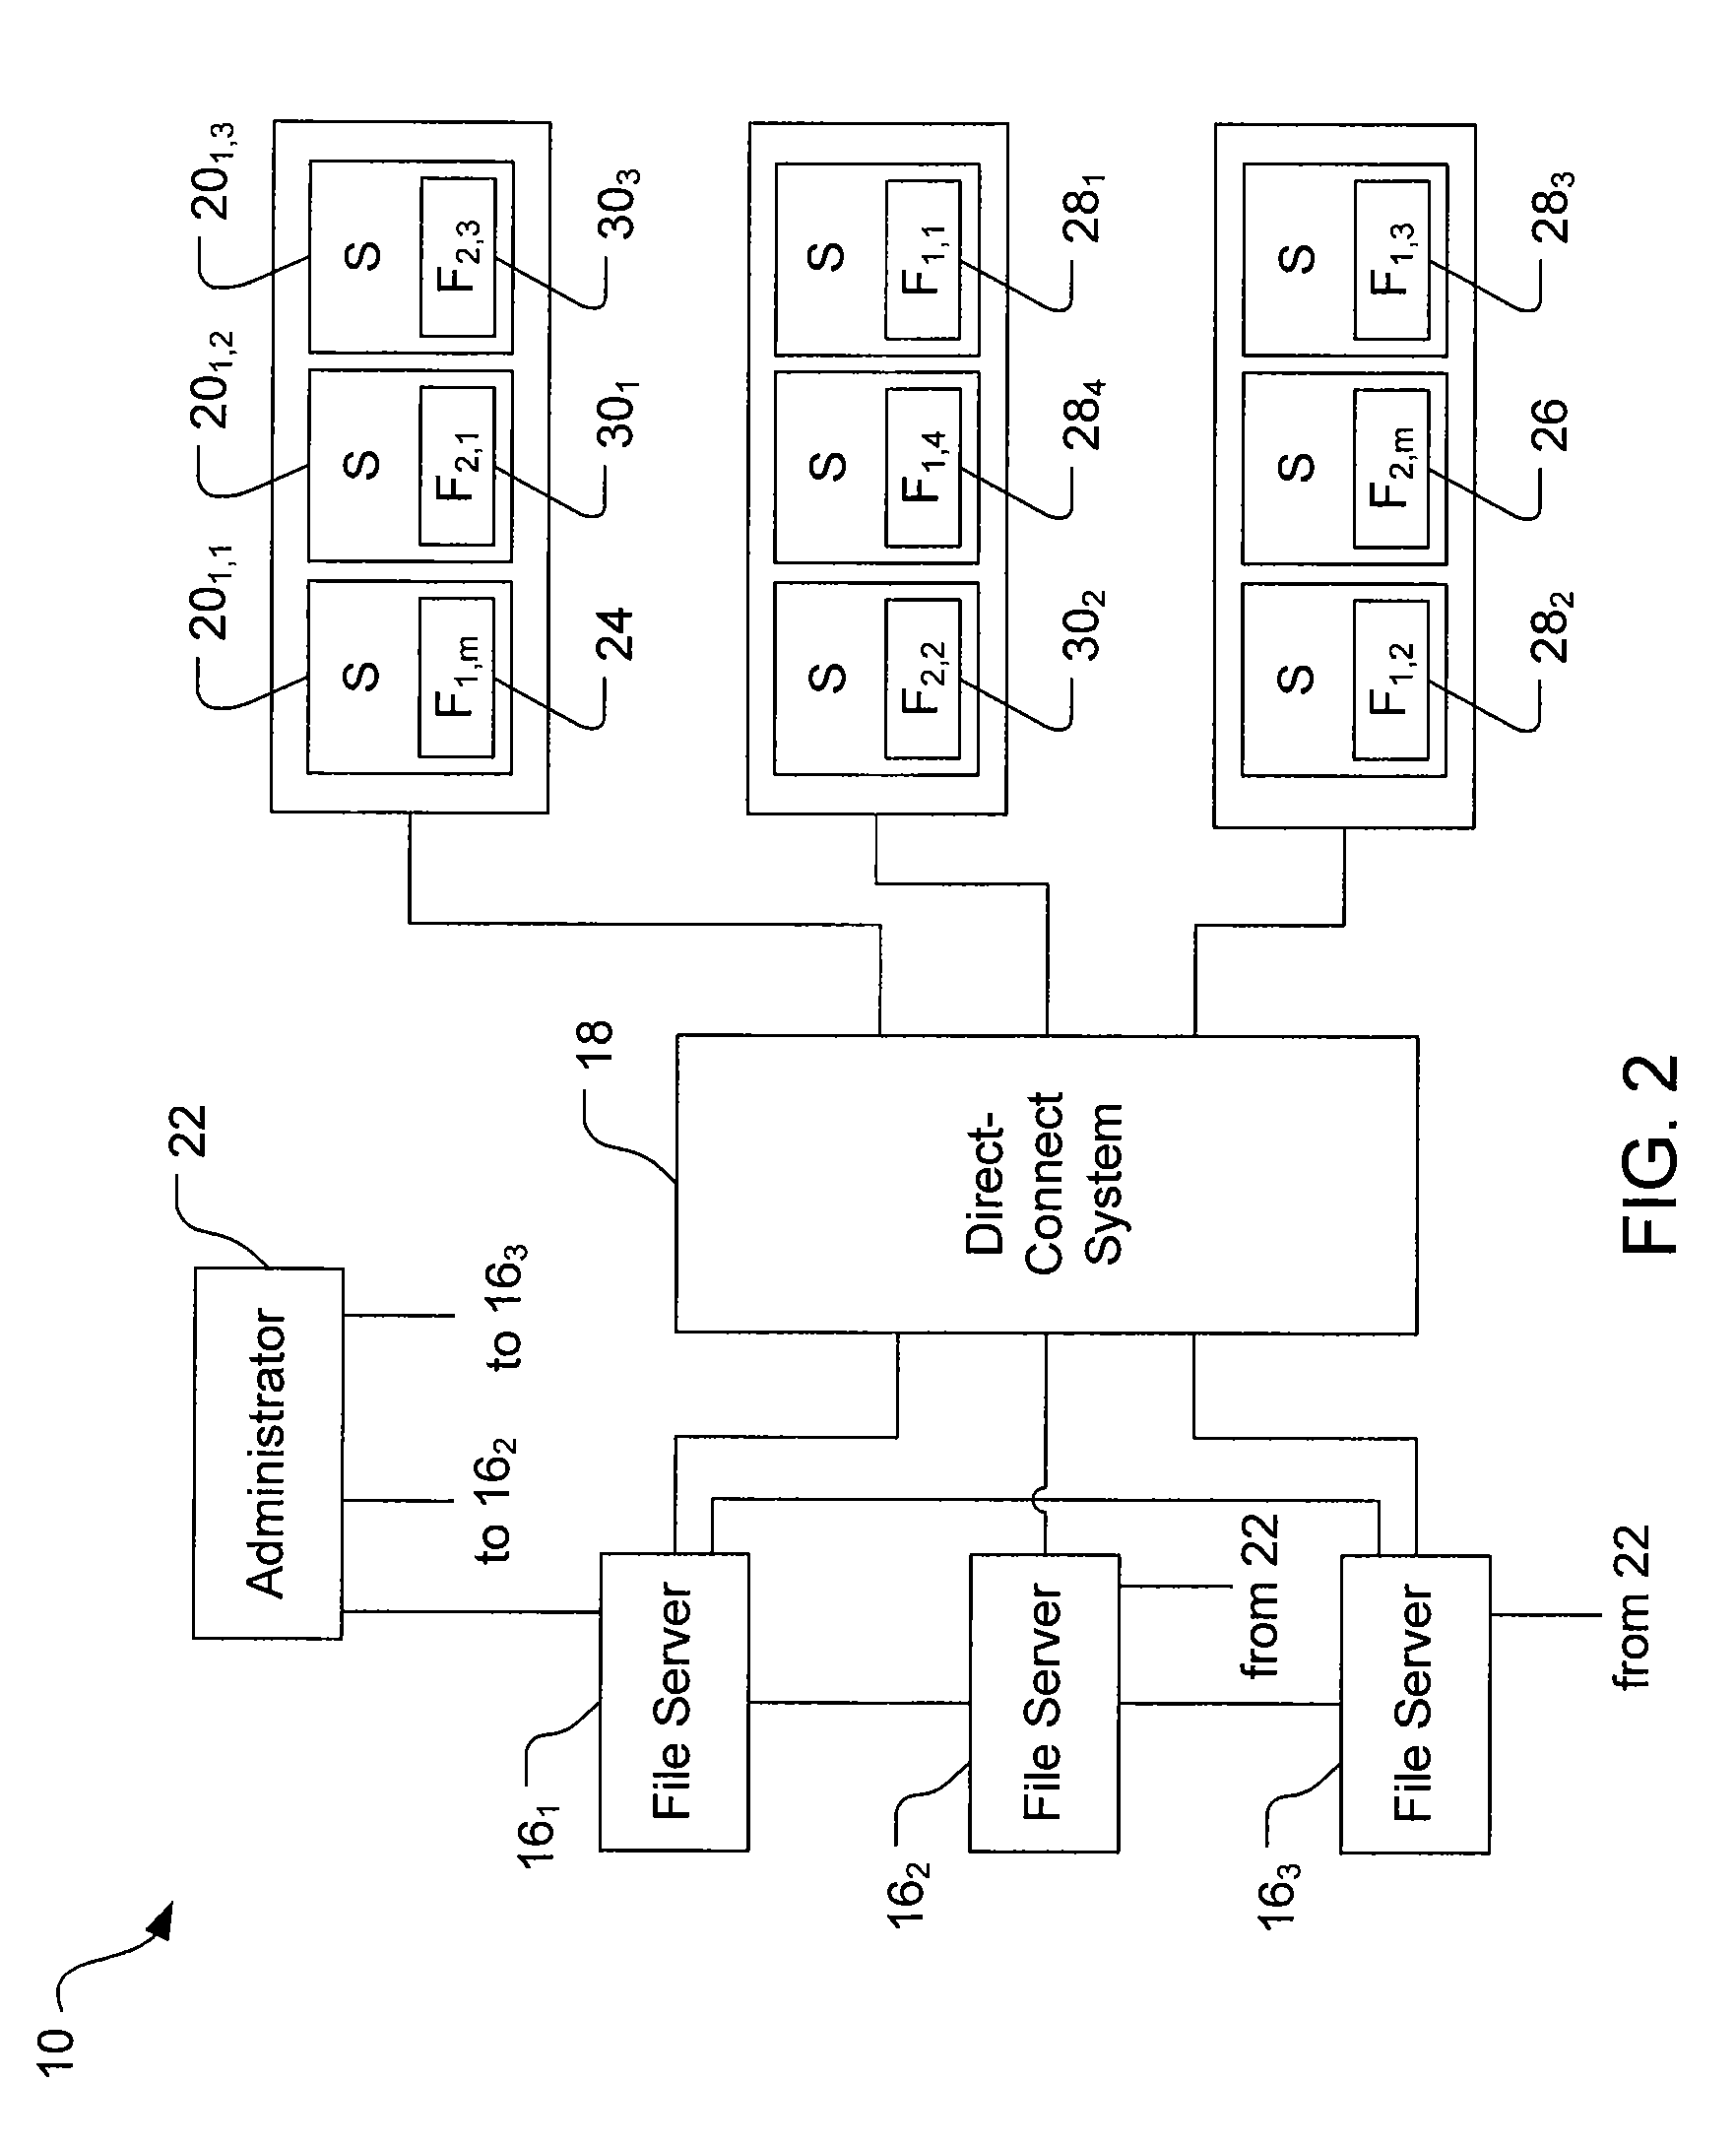 File replication in a distributed segmented file system